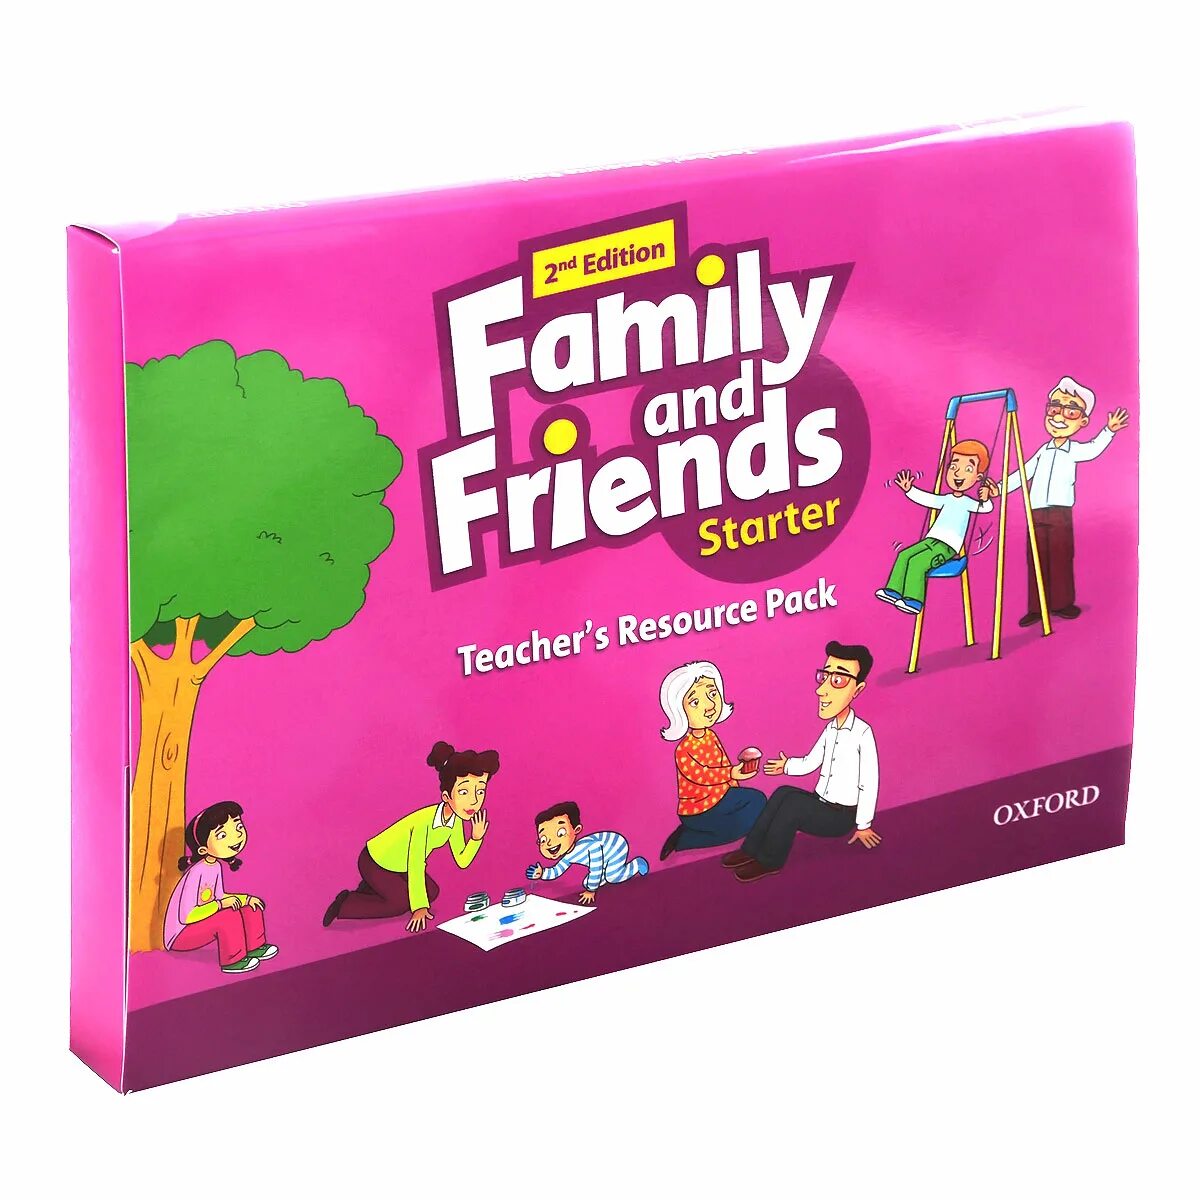 Family and friends starter book. Family and friends Starter книга. Фэмили френдс стартер. Family and friends 1 Starter. Family and friends Starter комплект.